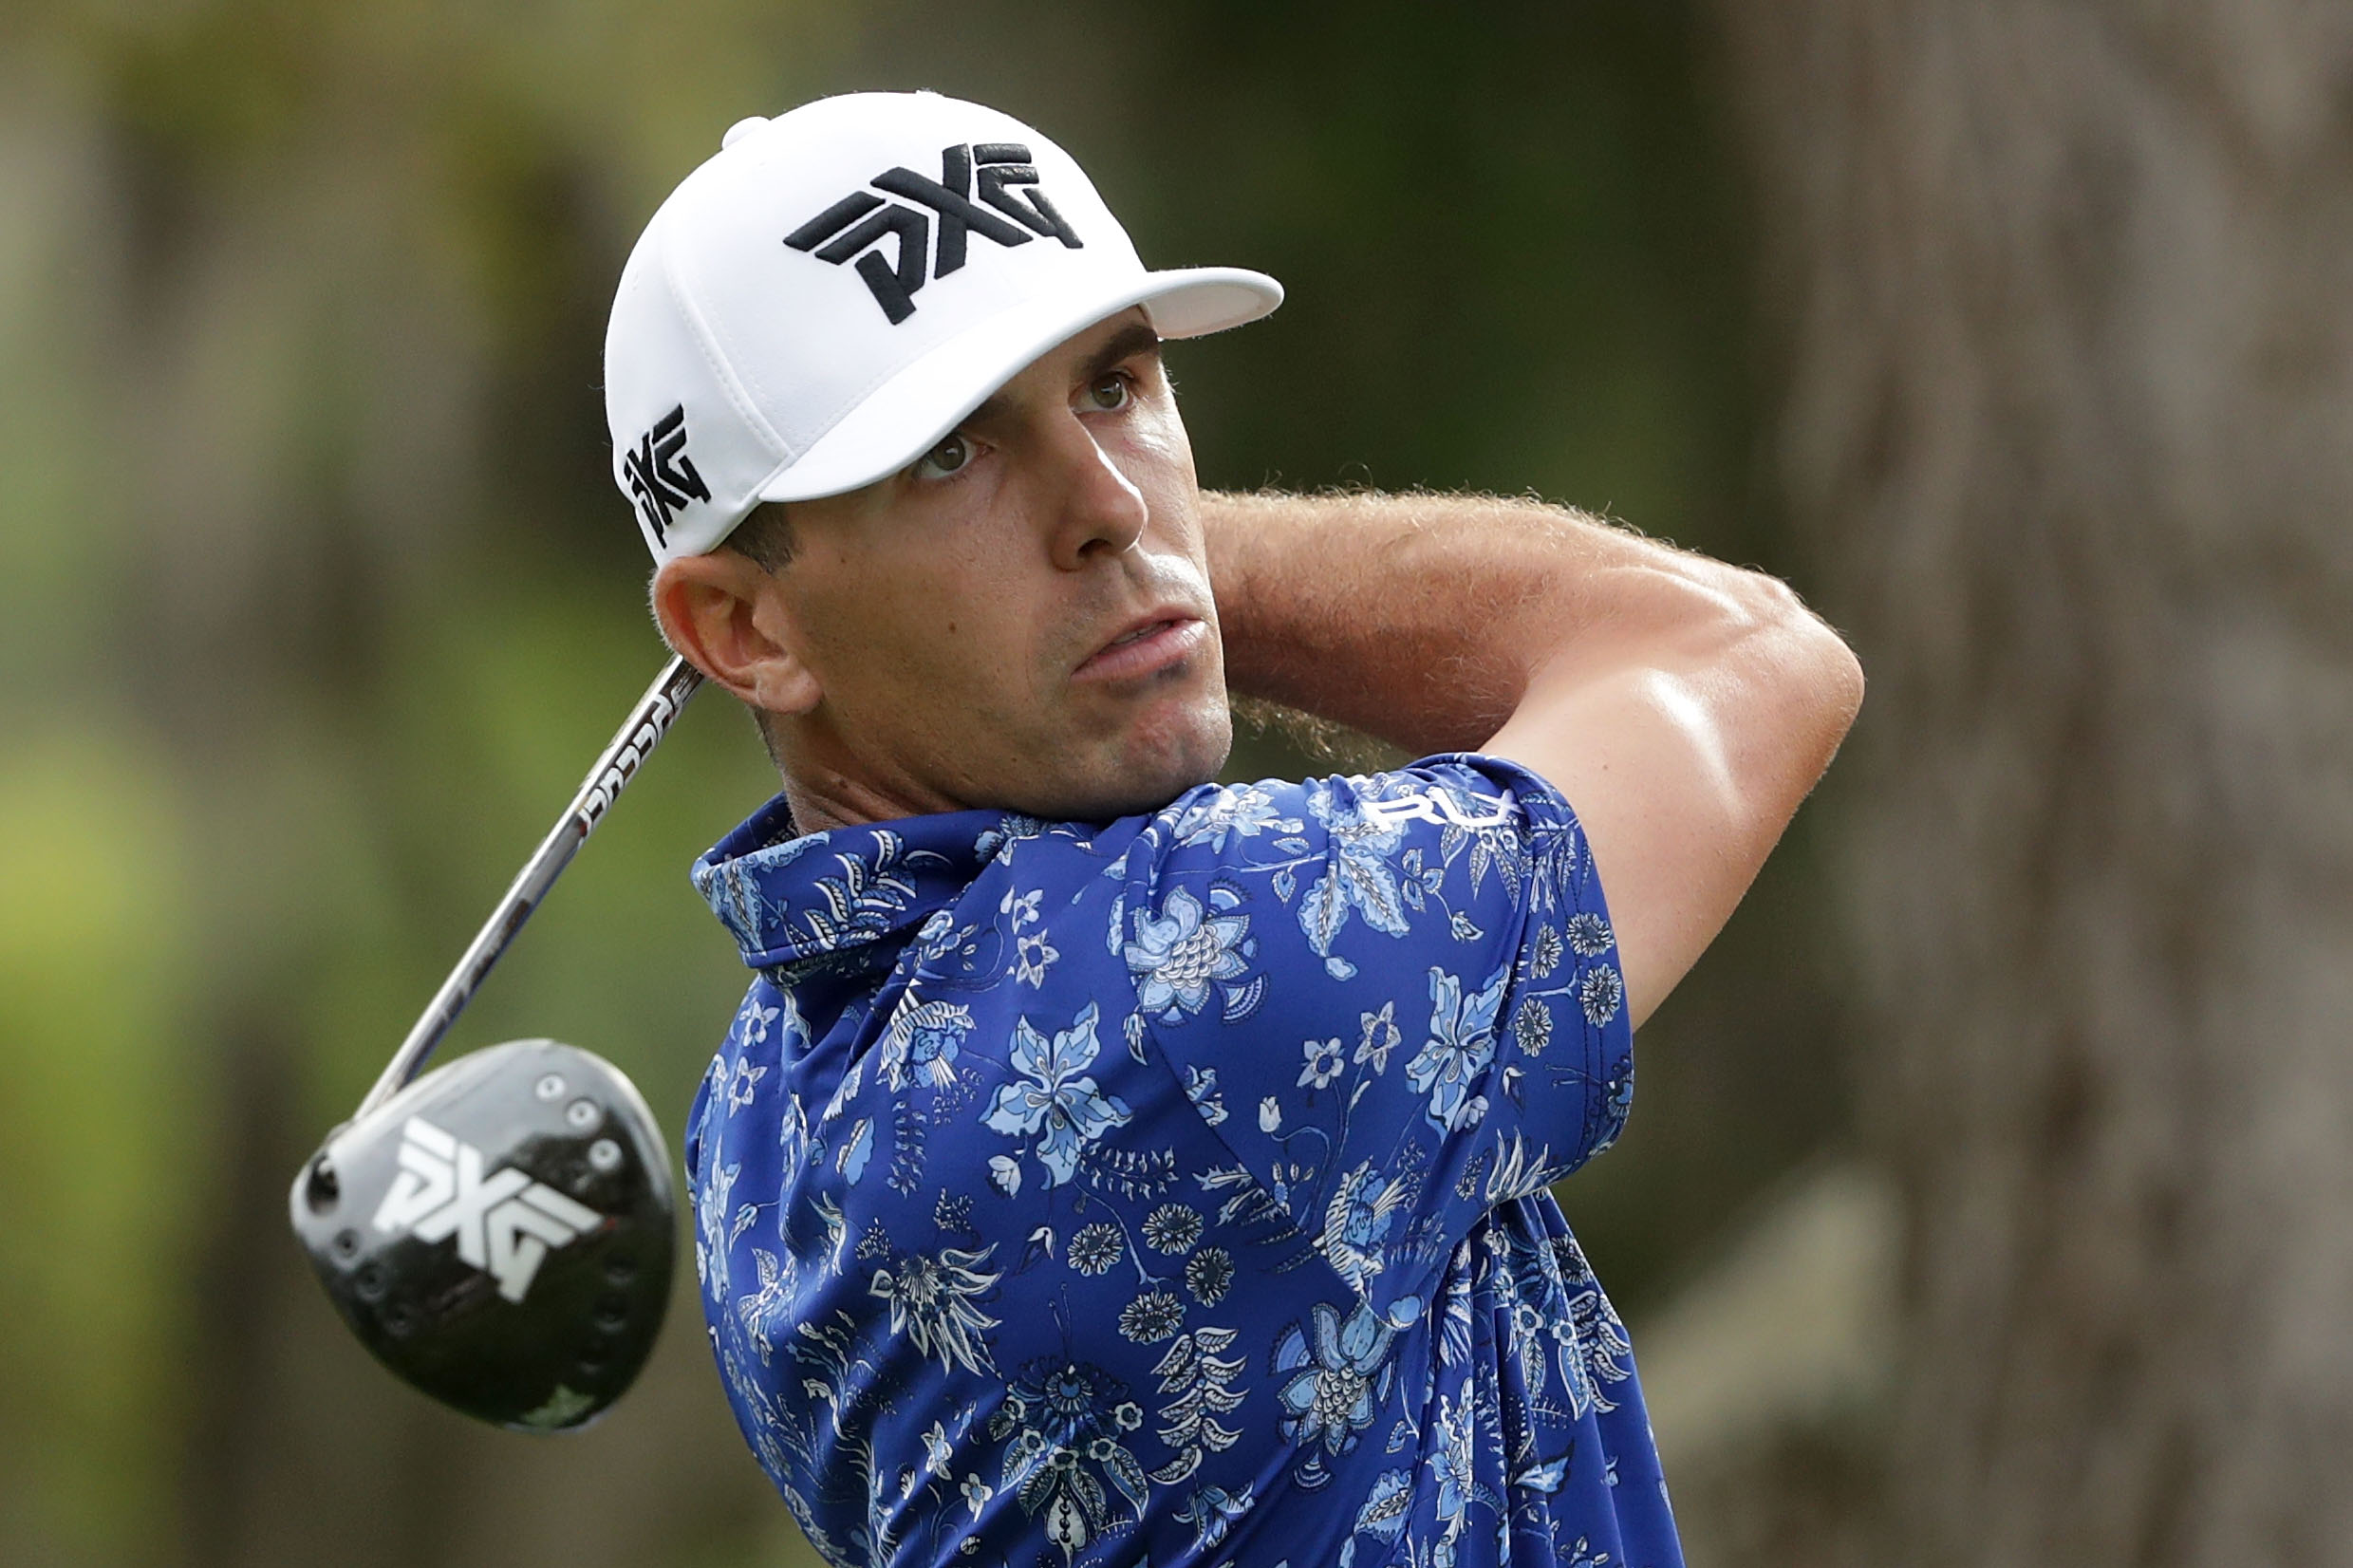 Billy Horschel believes he saw a UFO, gets ridiculed by fellow PGA Tour pros